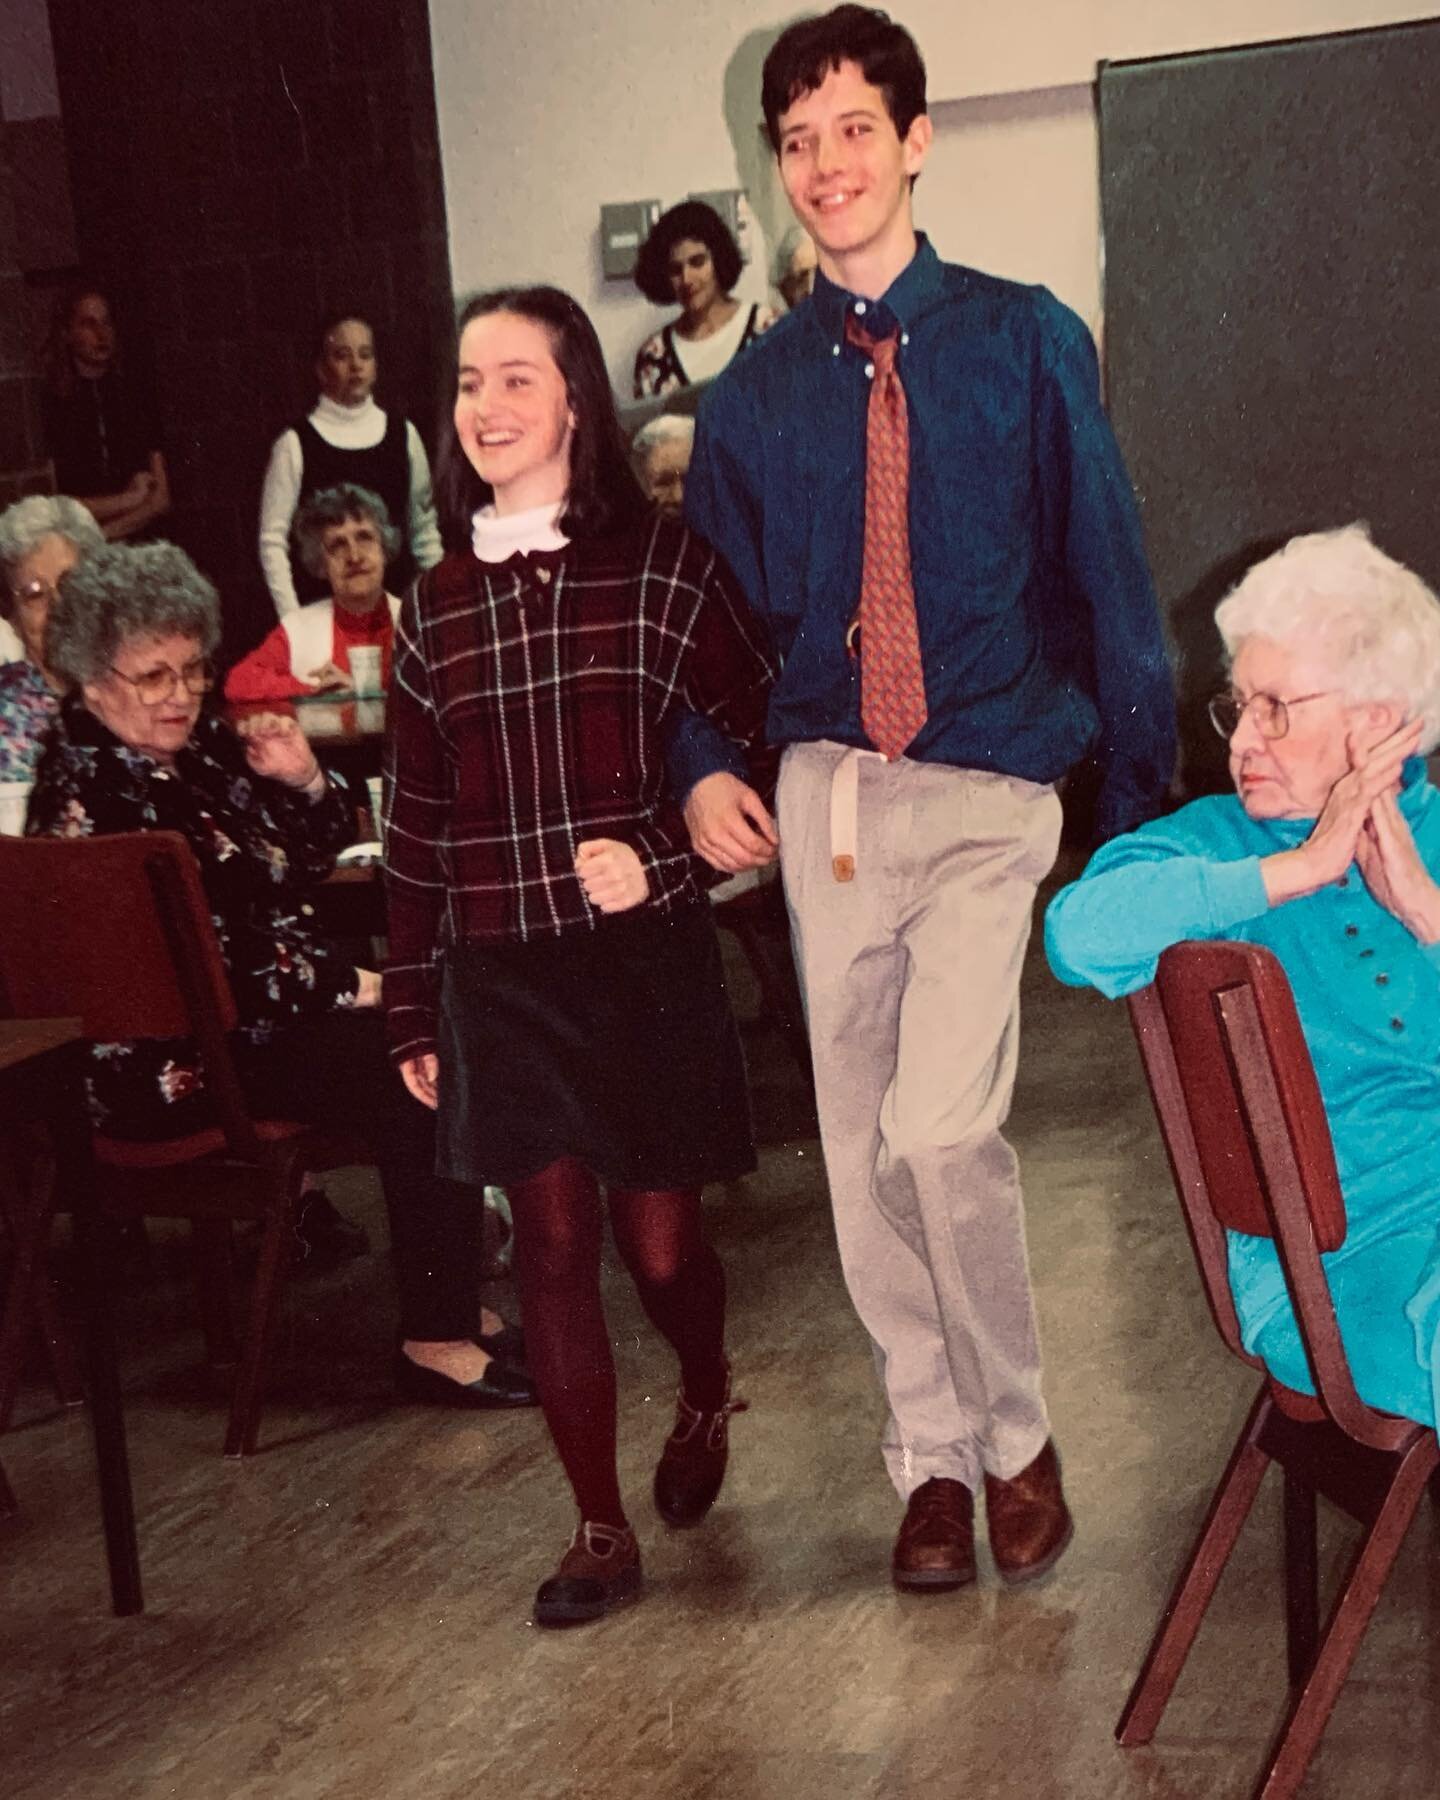 I am stepping back into the high school classroom this year. Fortunately @cmstanton390 reminded me how I looked the last time I was in one. From what I can gather, turtlenecks under plaid knit sweaters are the couture, but if you want to really turn 